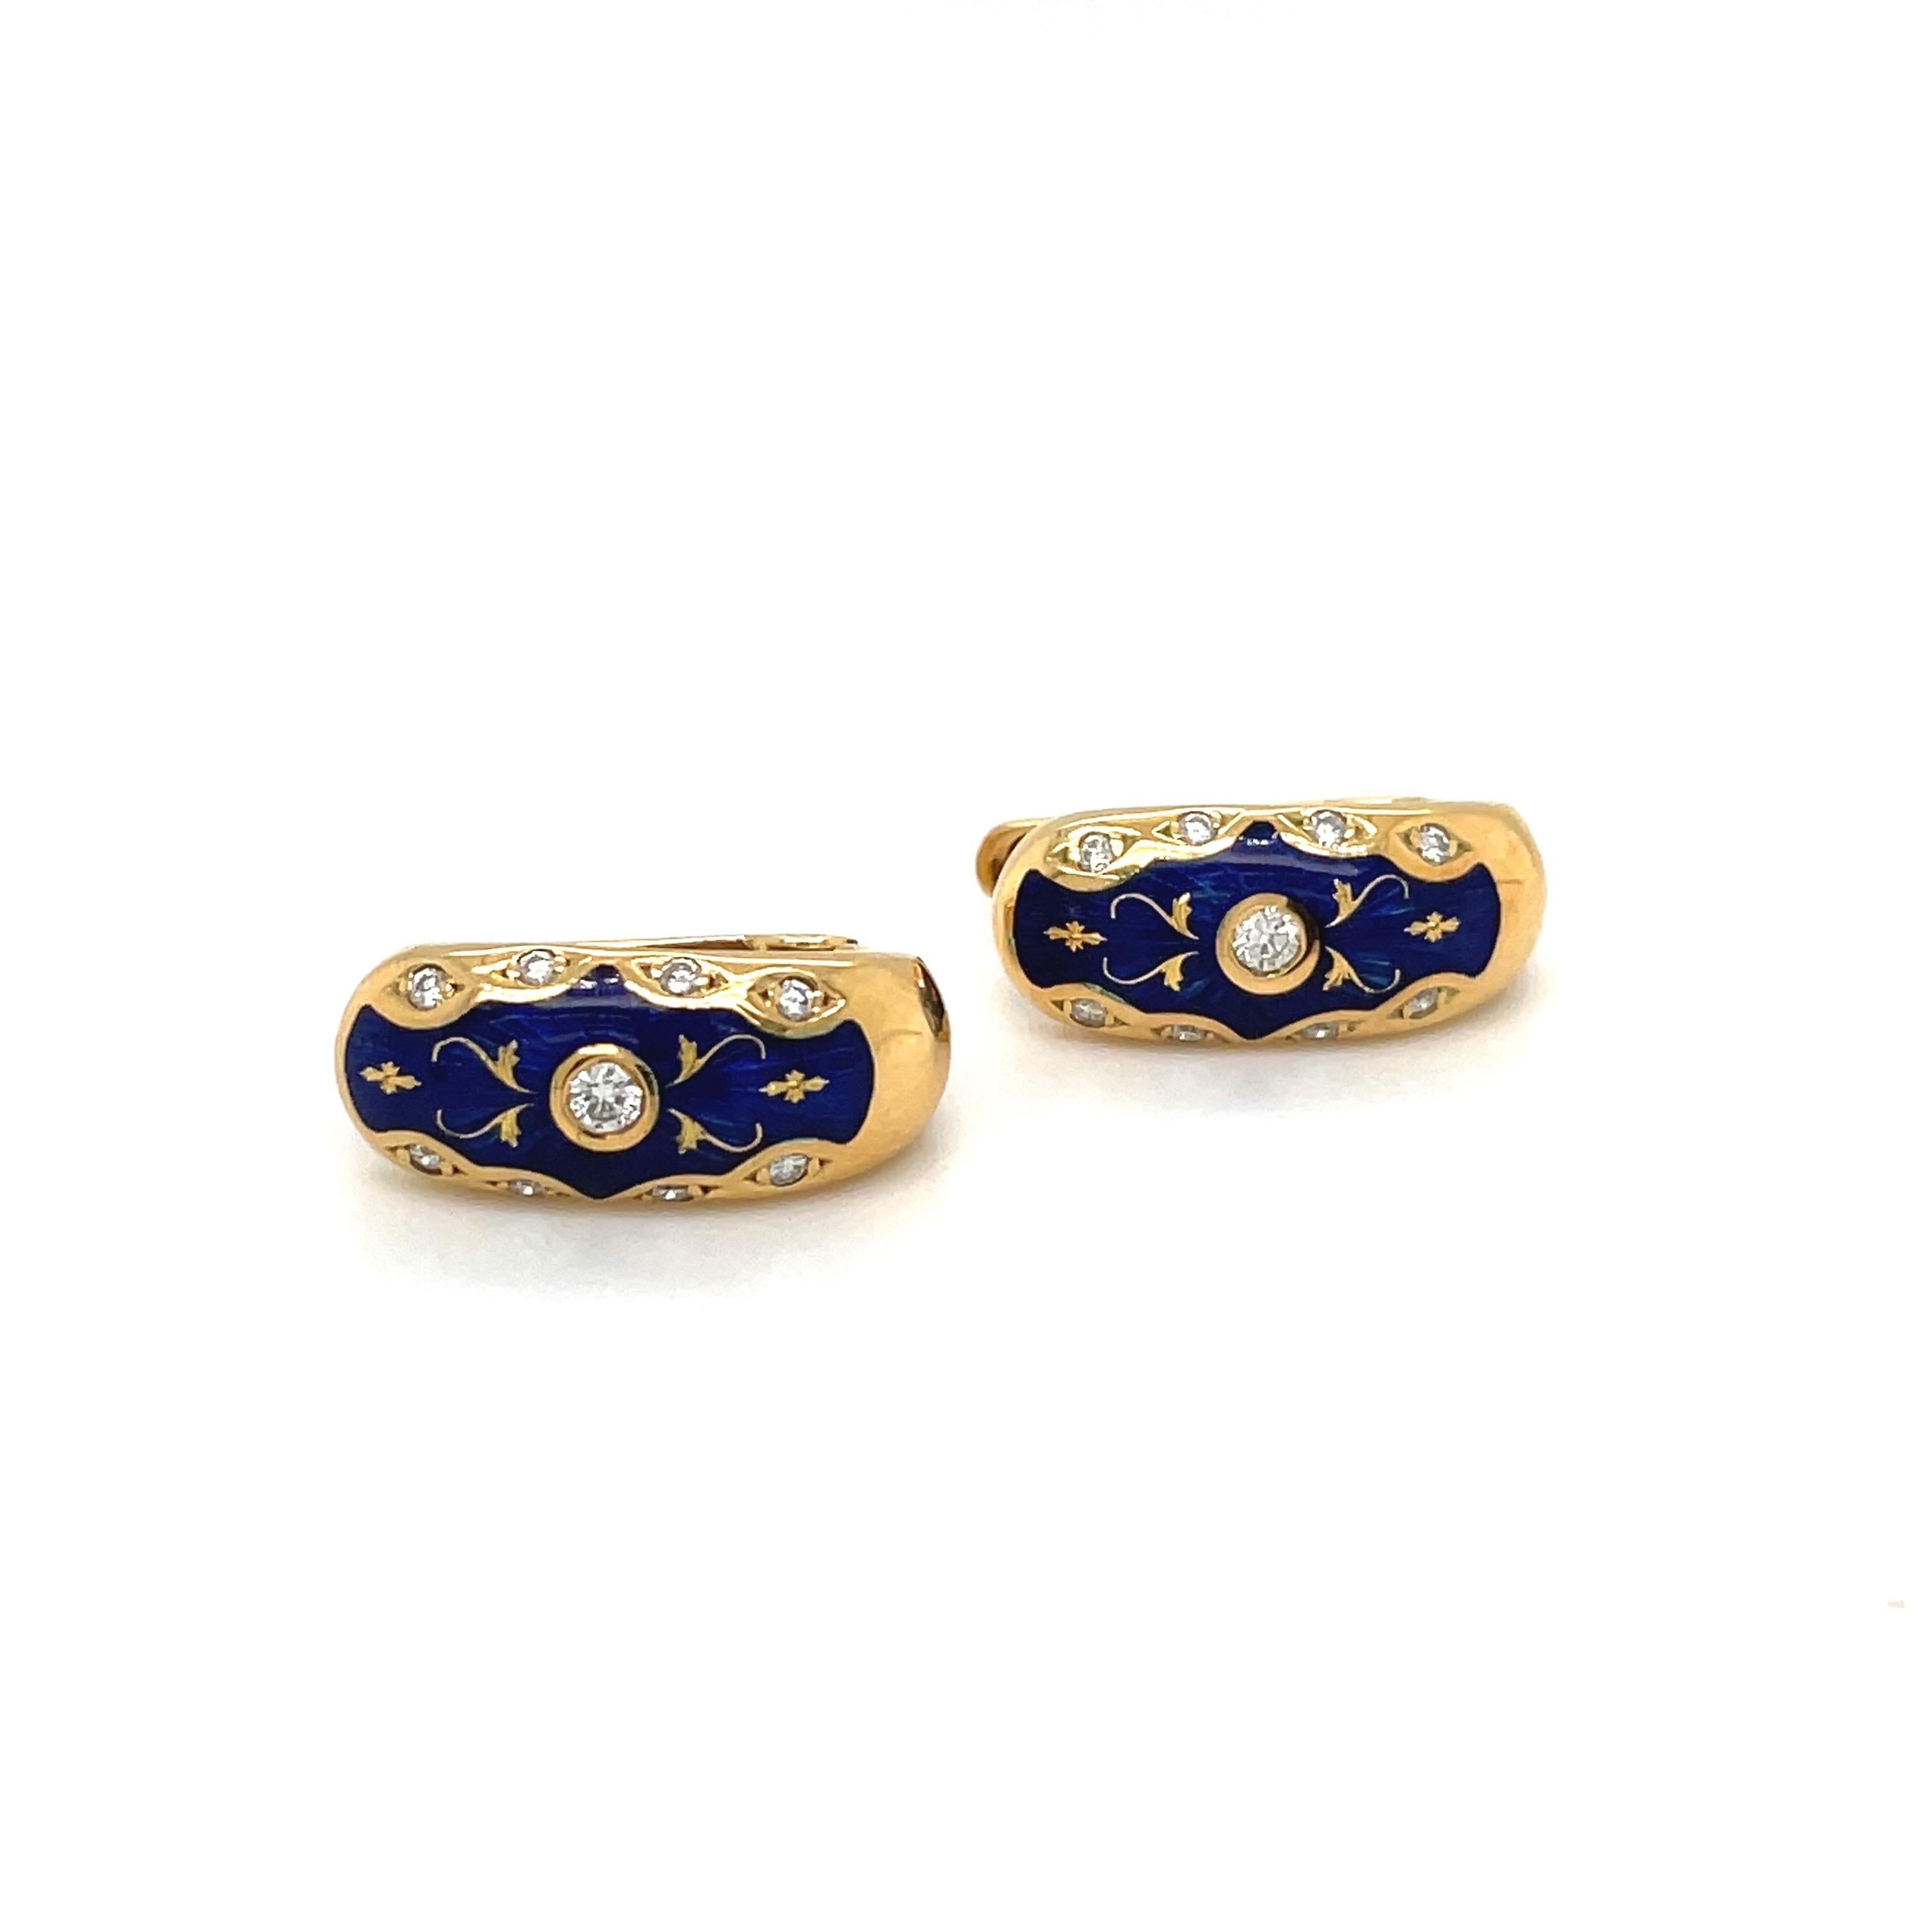 Round Cut Faberge 18kt Yellow Gold Diamond 0.24cts. & Blue Enamel Huggy Earrings #51/300 For Sale